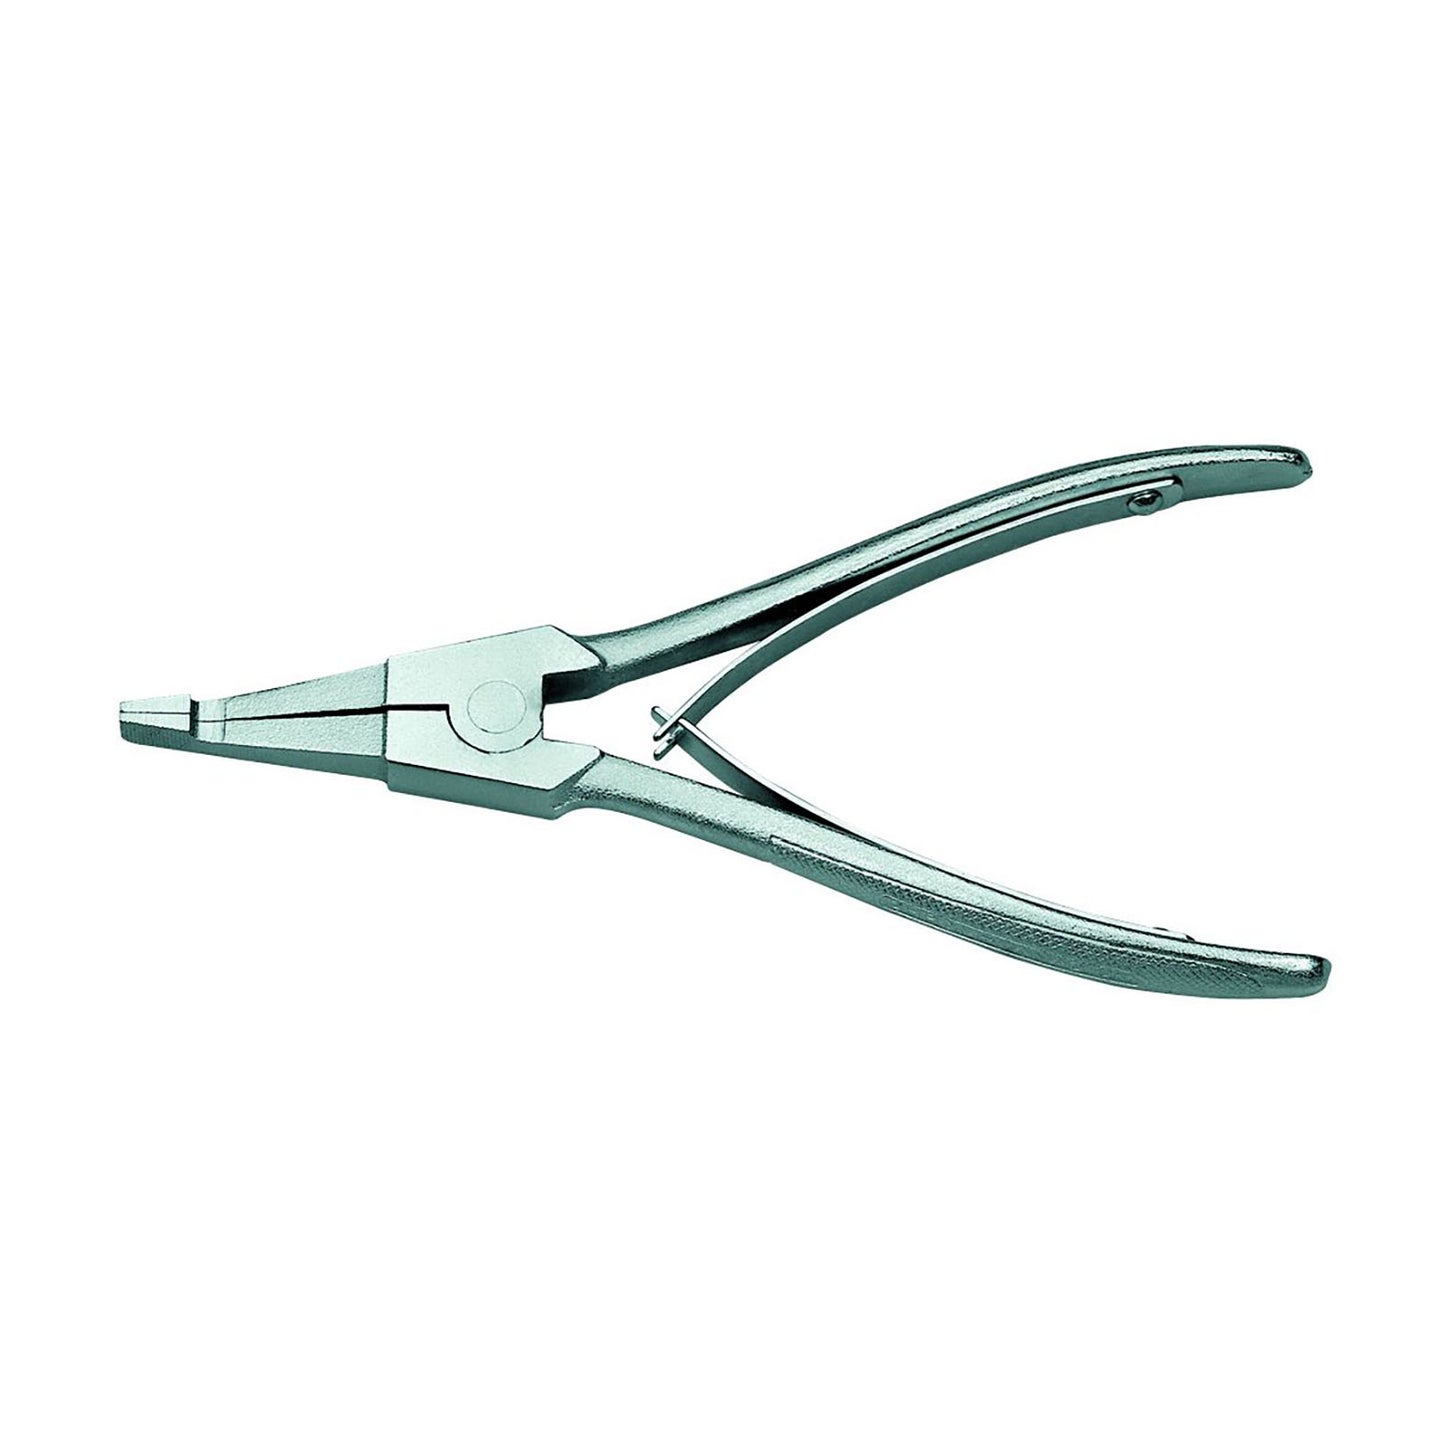 GEDORE 8134-170 C - Assembly pliers (6722030)